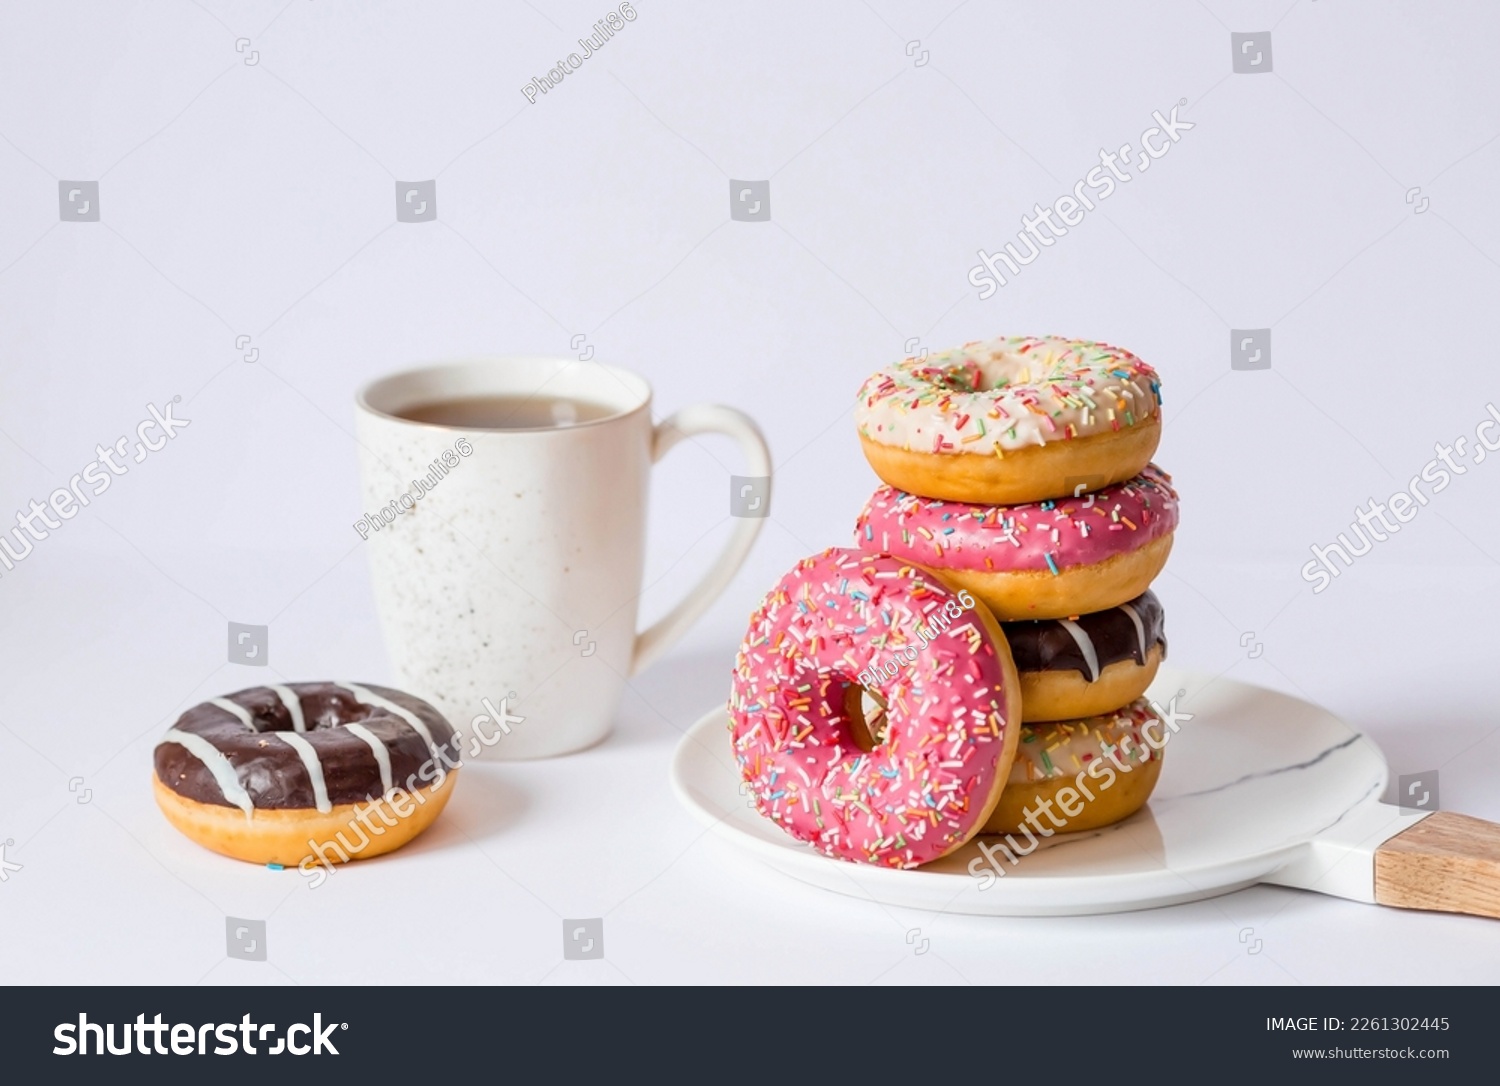 Delicious dessert. Pink, white and chocolate donuts with multicolored sprinkles, a cup of black coffee or tea. Sweets. #2261302445